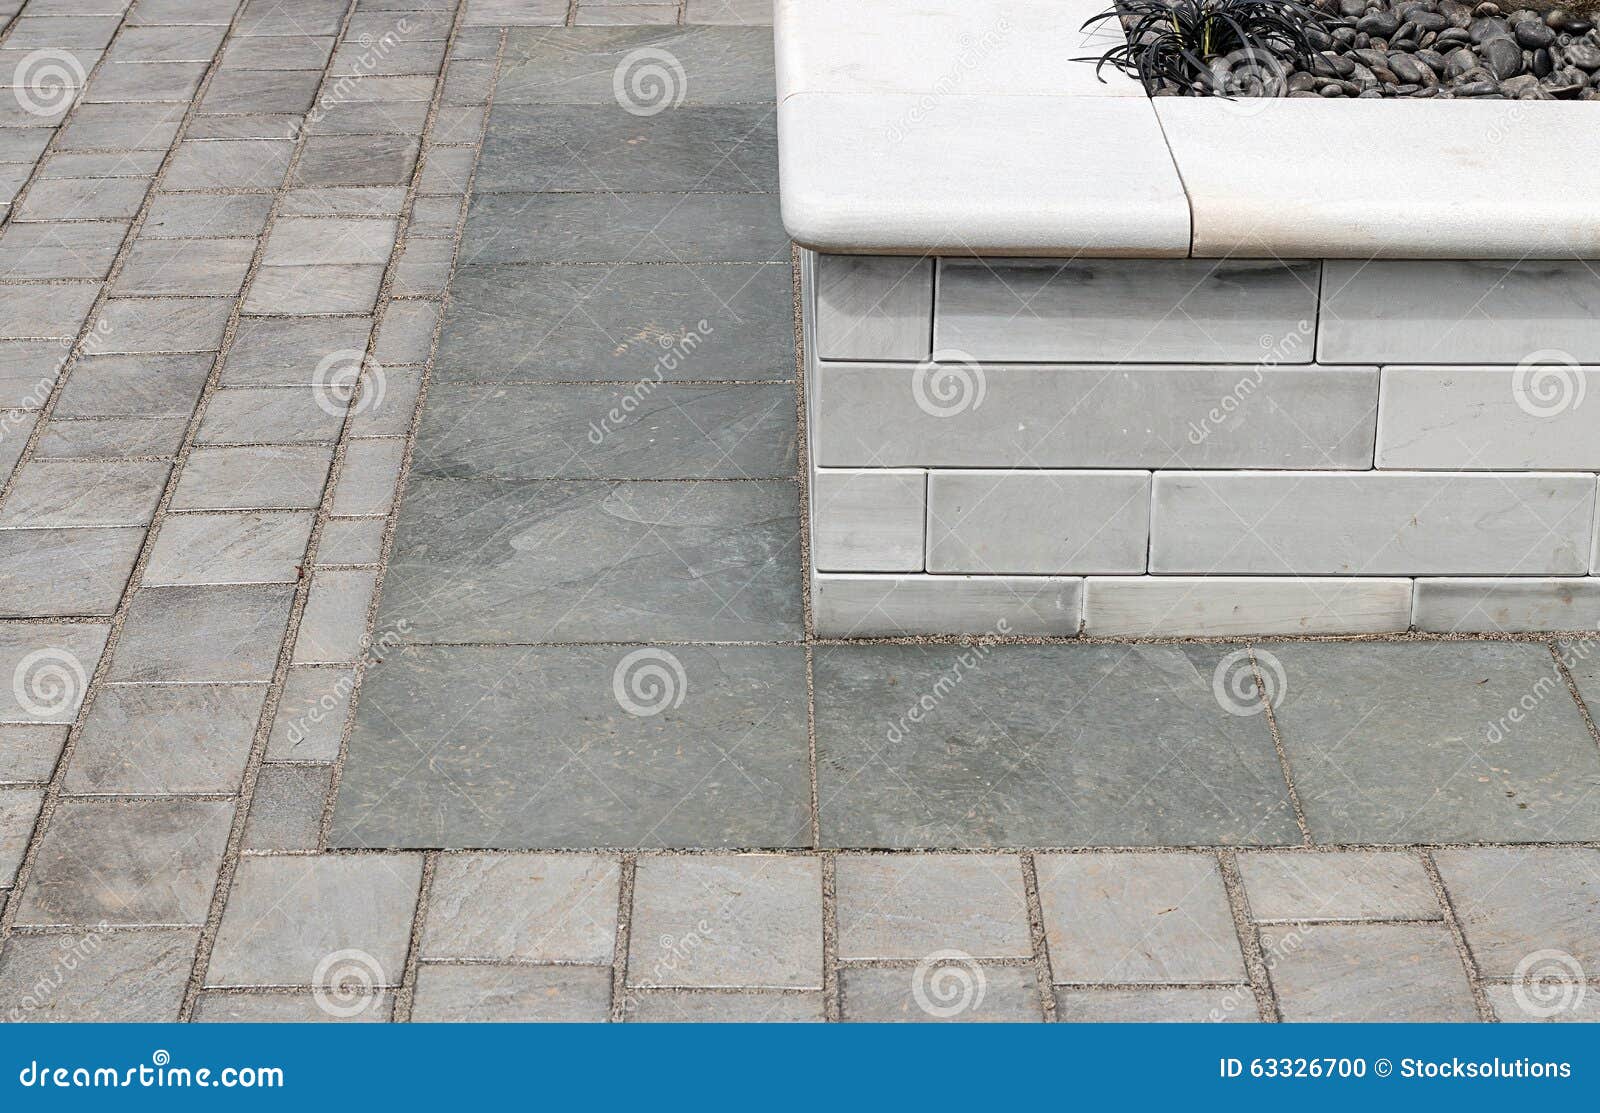 Garden Paving Example Stock Photo Image Of Outdoor Material